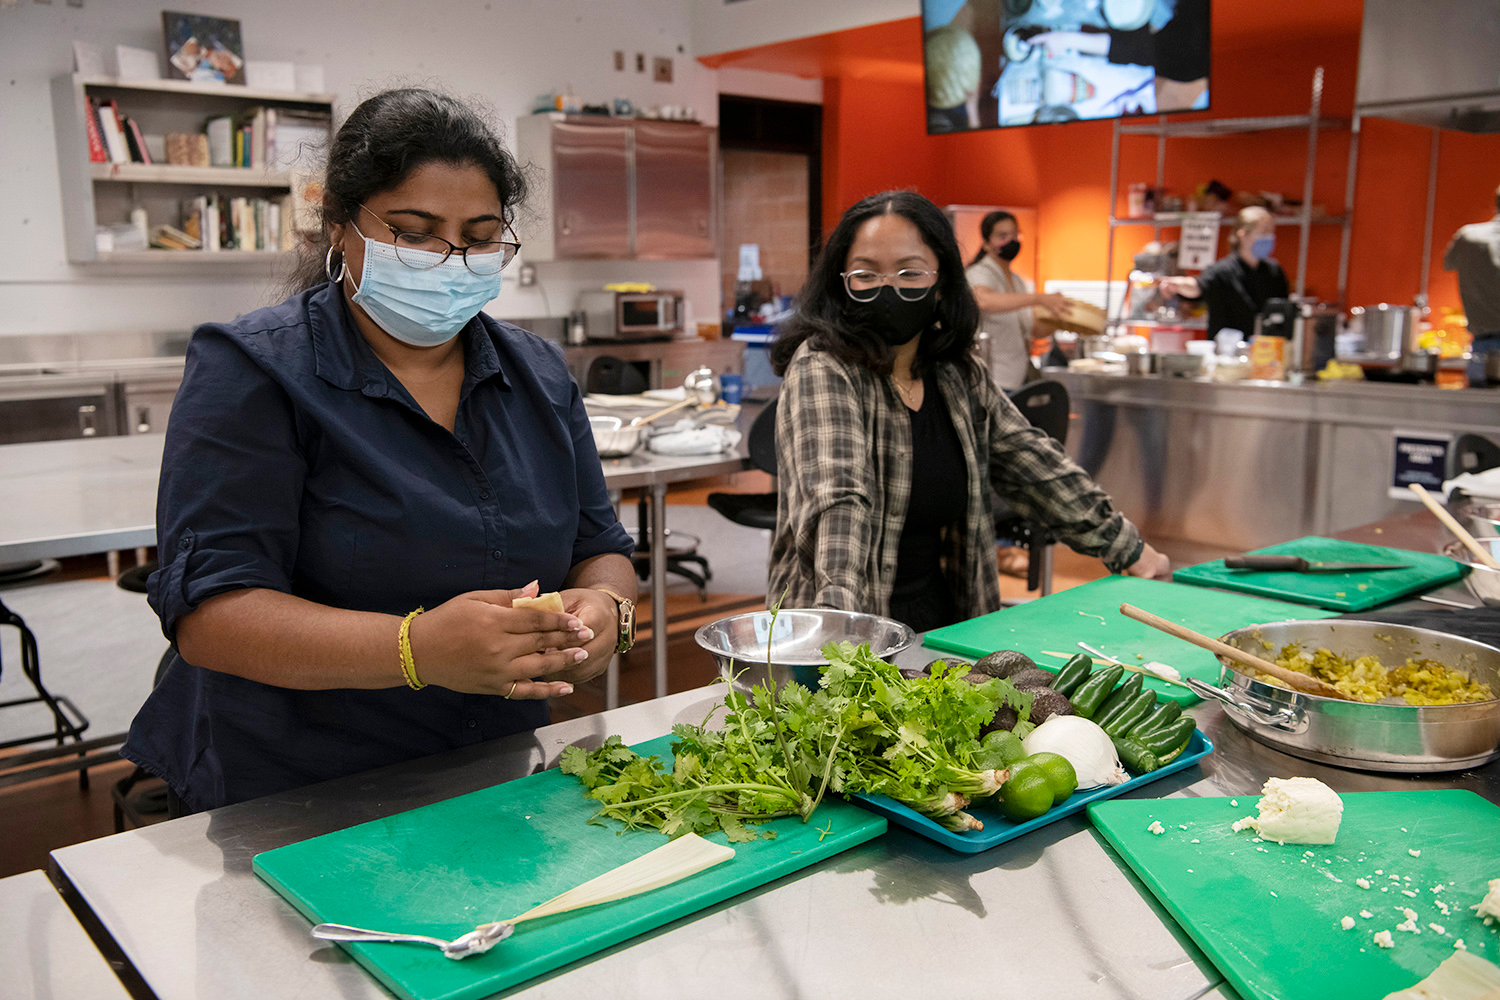 Two students, wearing face masks, prepare food in U of T Scarborough's kitchen lab, a tray of fresh cilantro, avocados, limes and other vegetables on the counter in front of them.